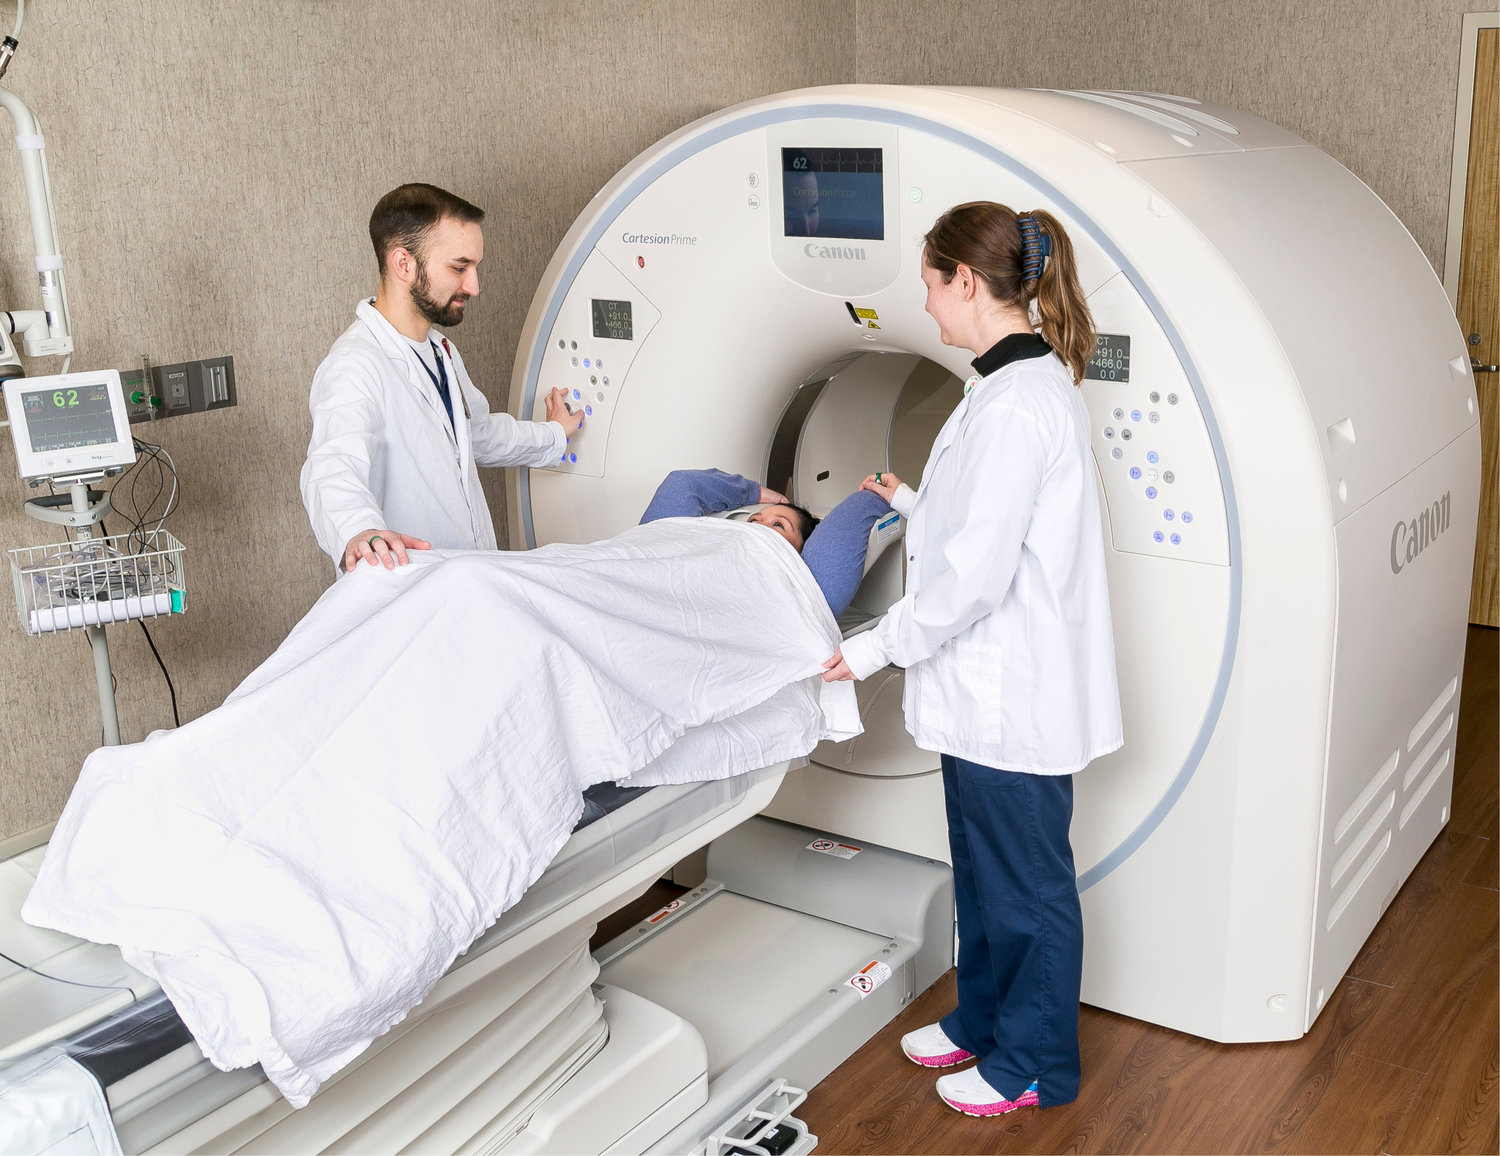 Nuclear medicine tech/CT tech Madison Eades, right, and Trey Koonce, nuclear medicine tech, work with a patient in the new Cartesion Prime PET/CT scanner.